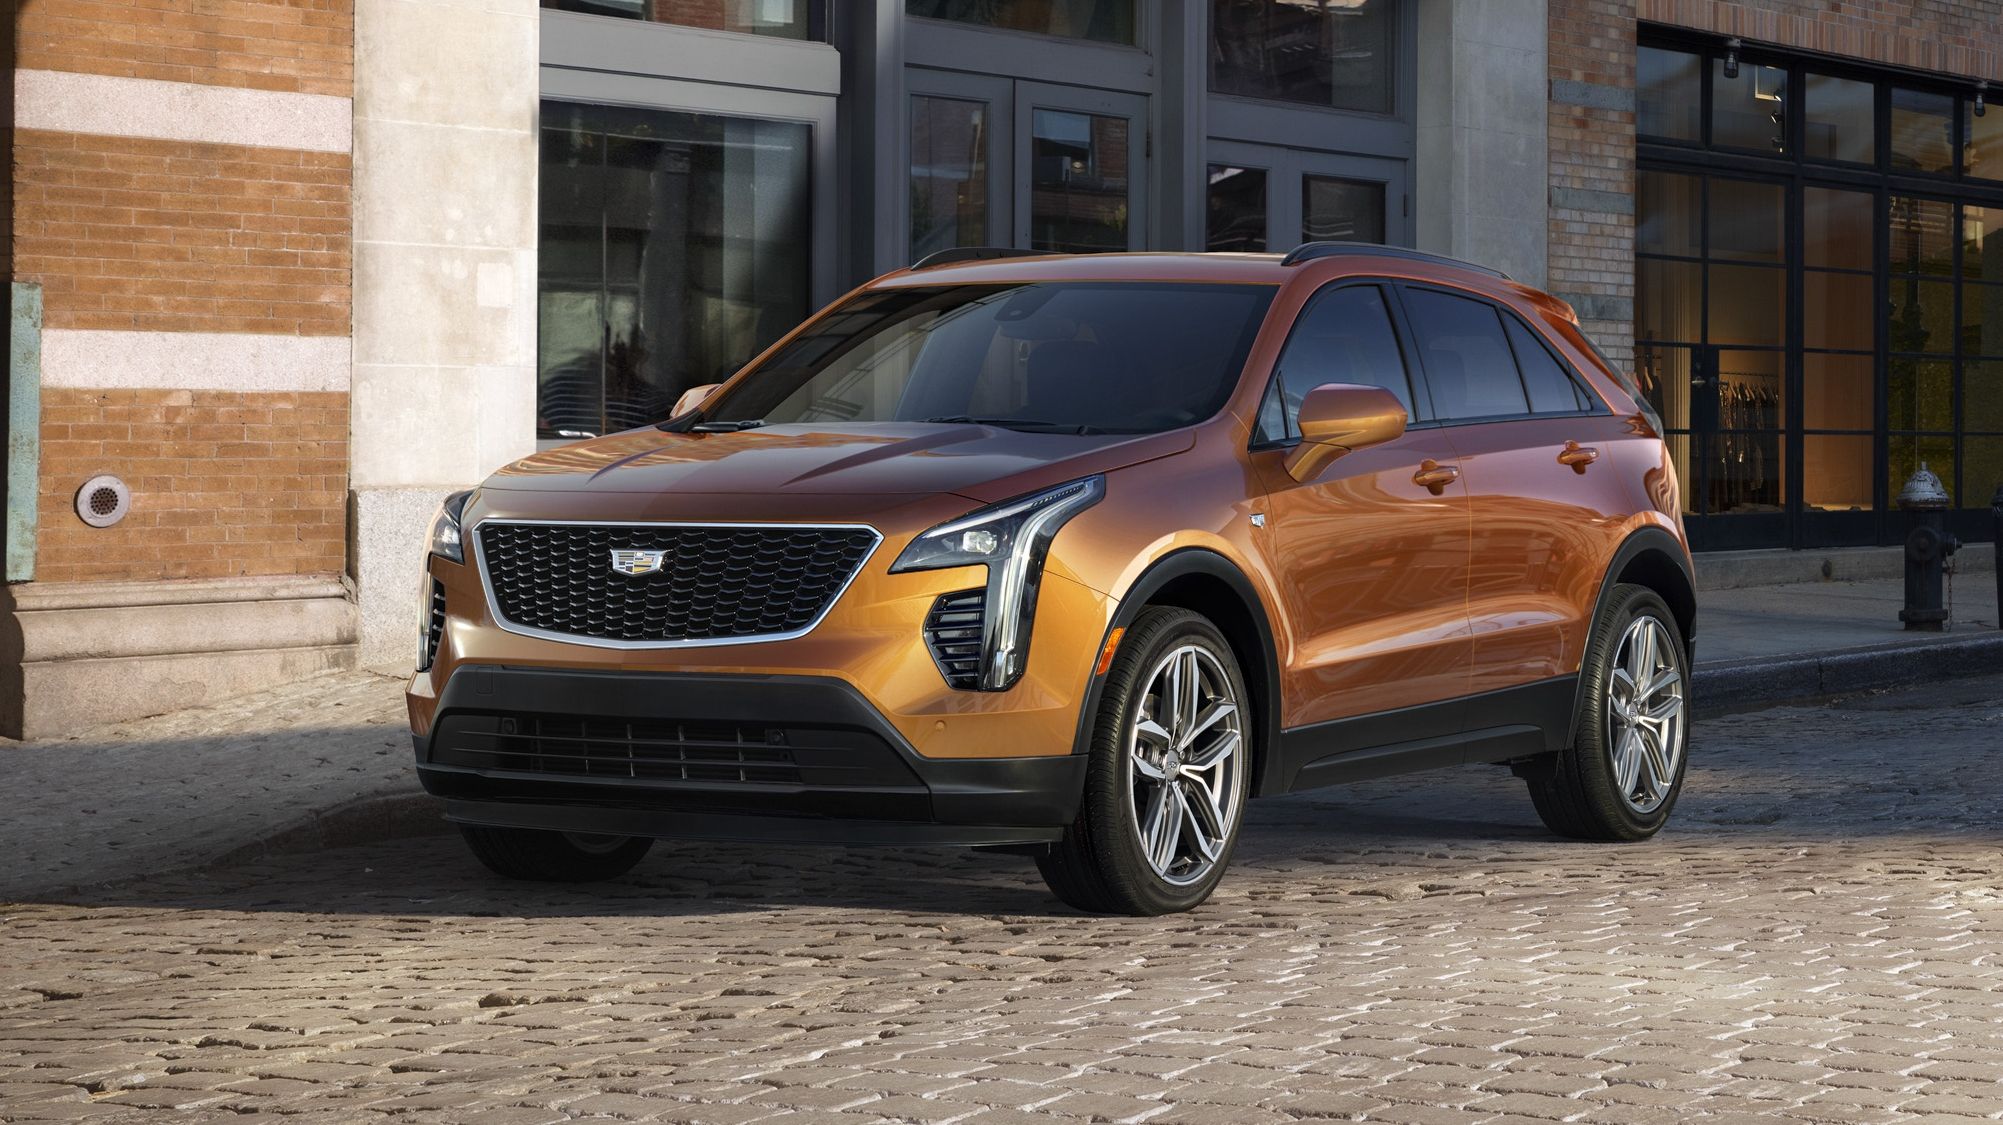 2018 The Cadillac XT4 Sends a Warning to BMW, Mercedes, and Audi